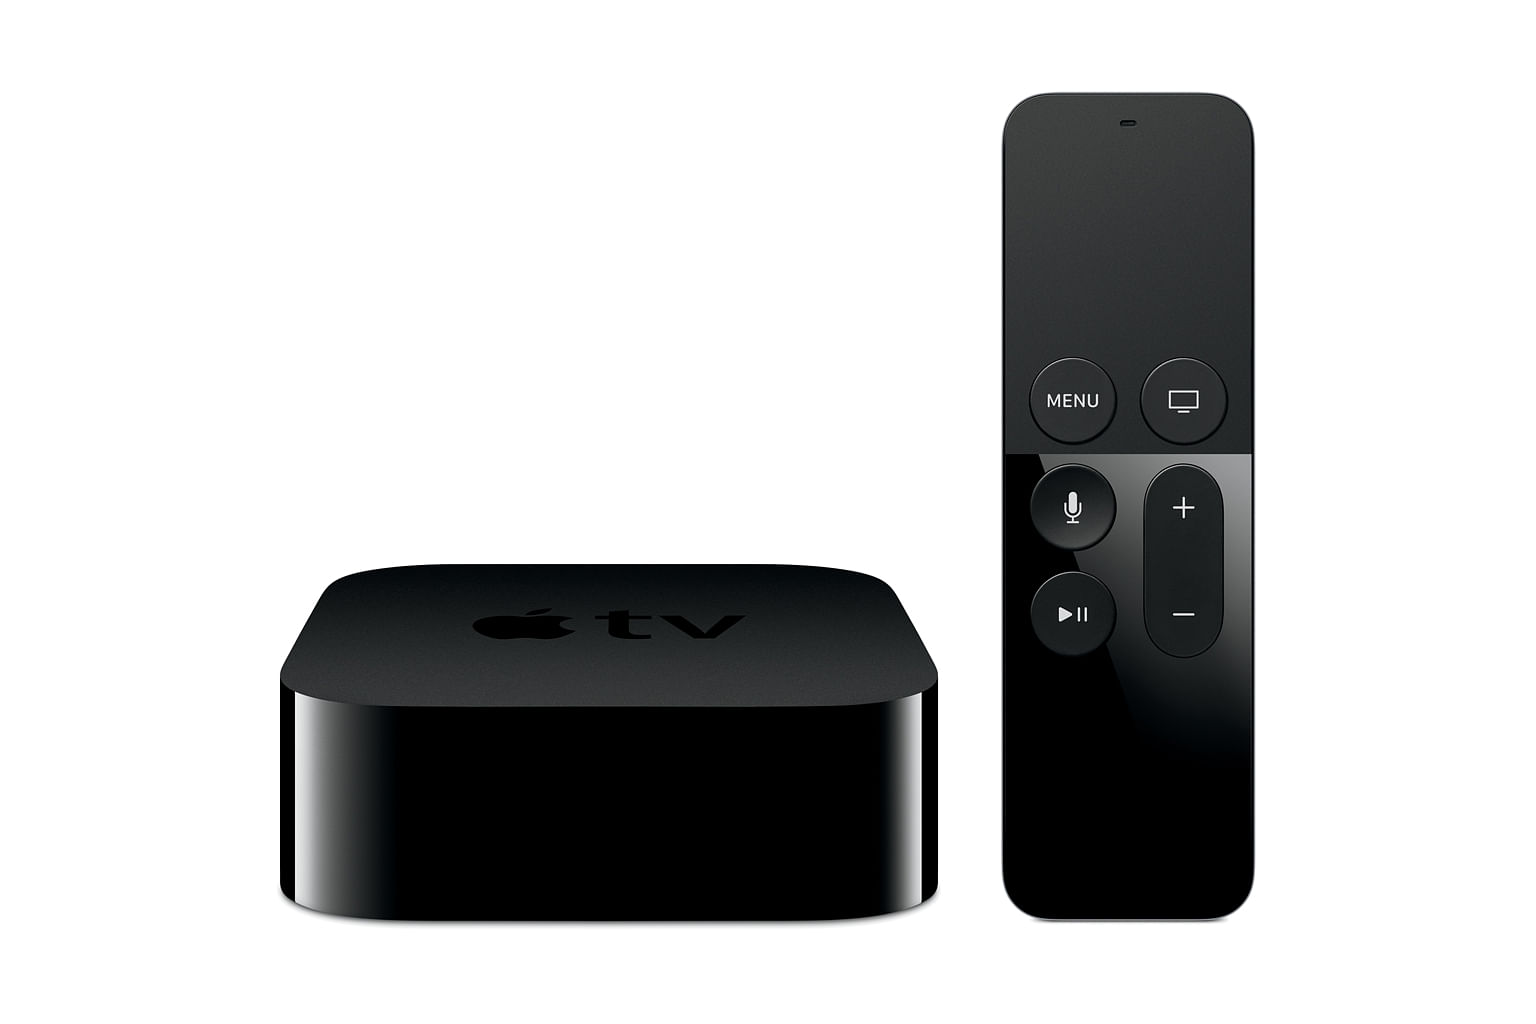 One advantage that the new fourth-generation Apple TV has is the tvOS ecosystem, which, the writer believes, will continue to grow.